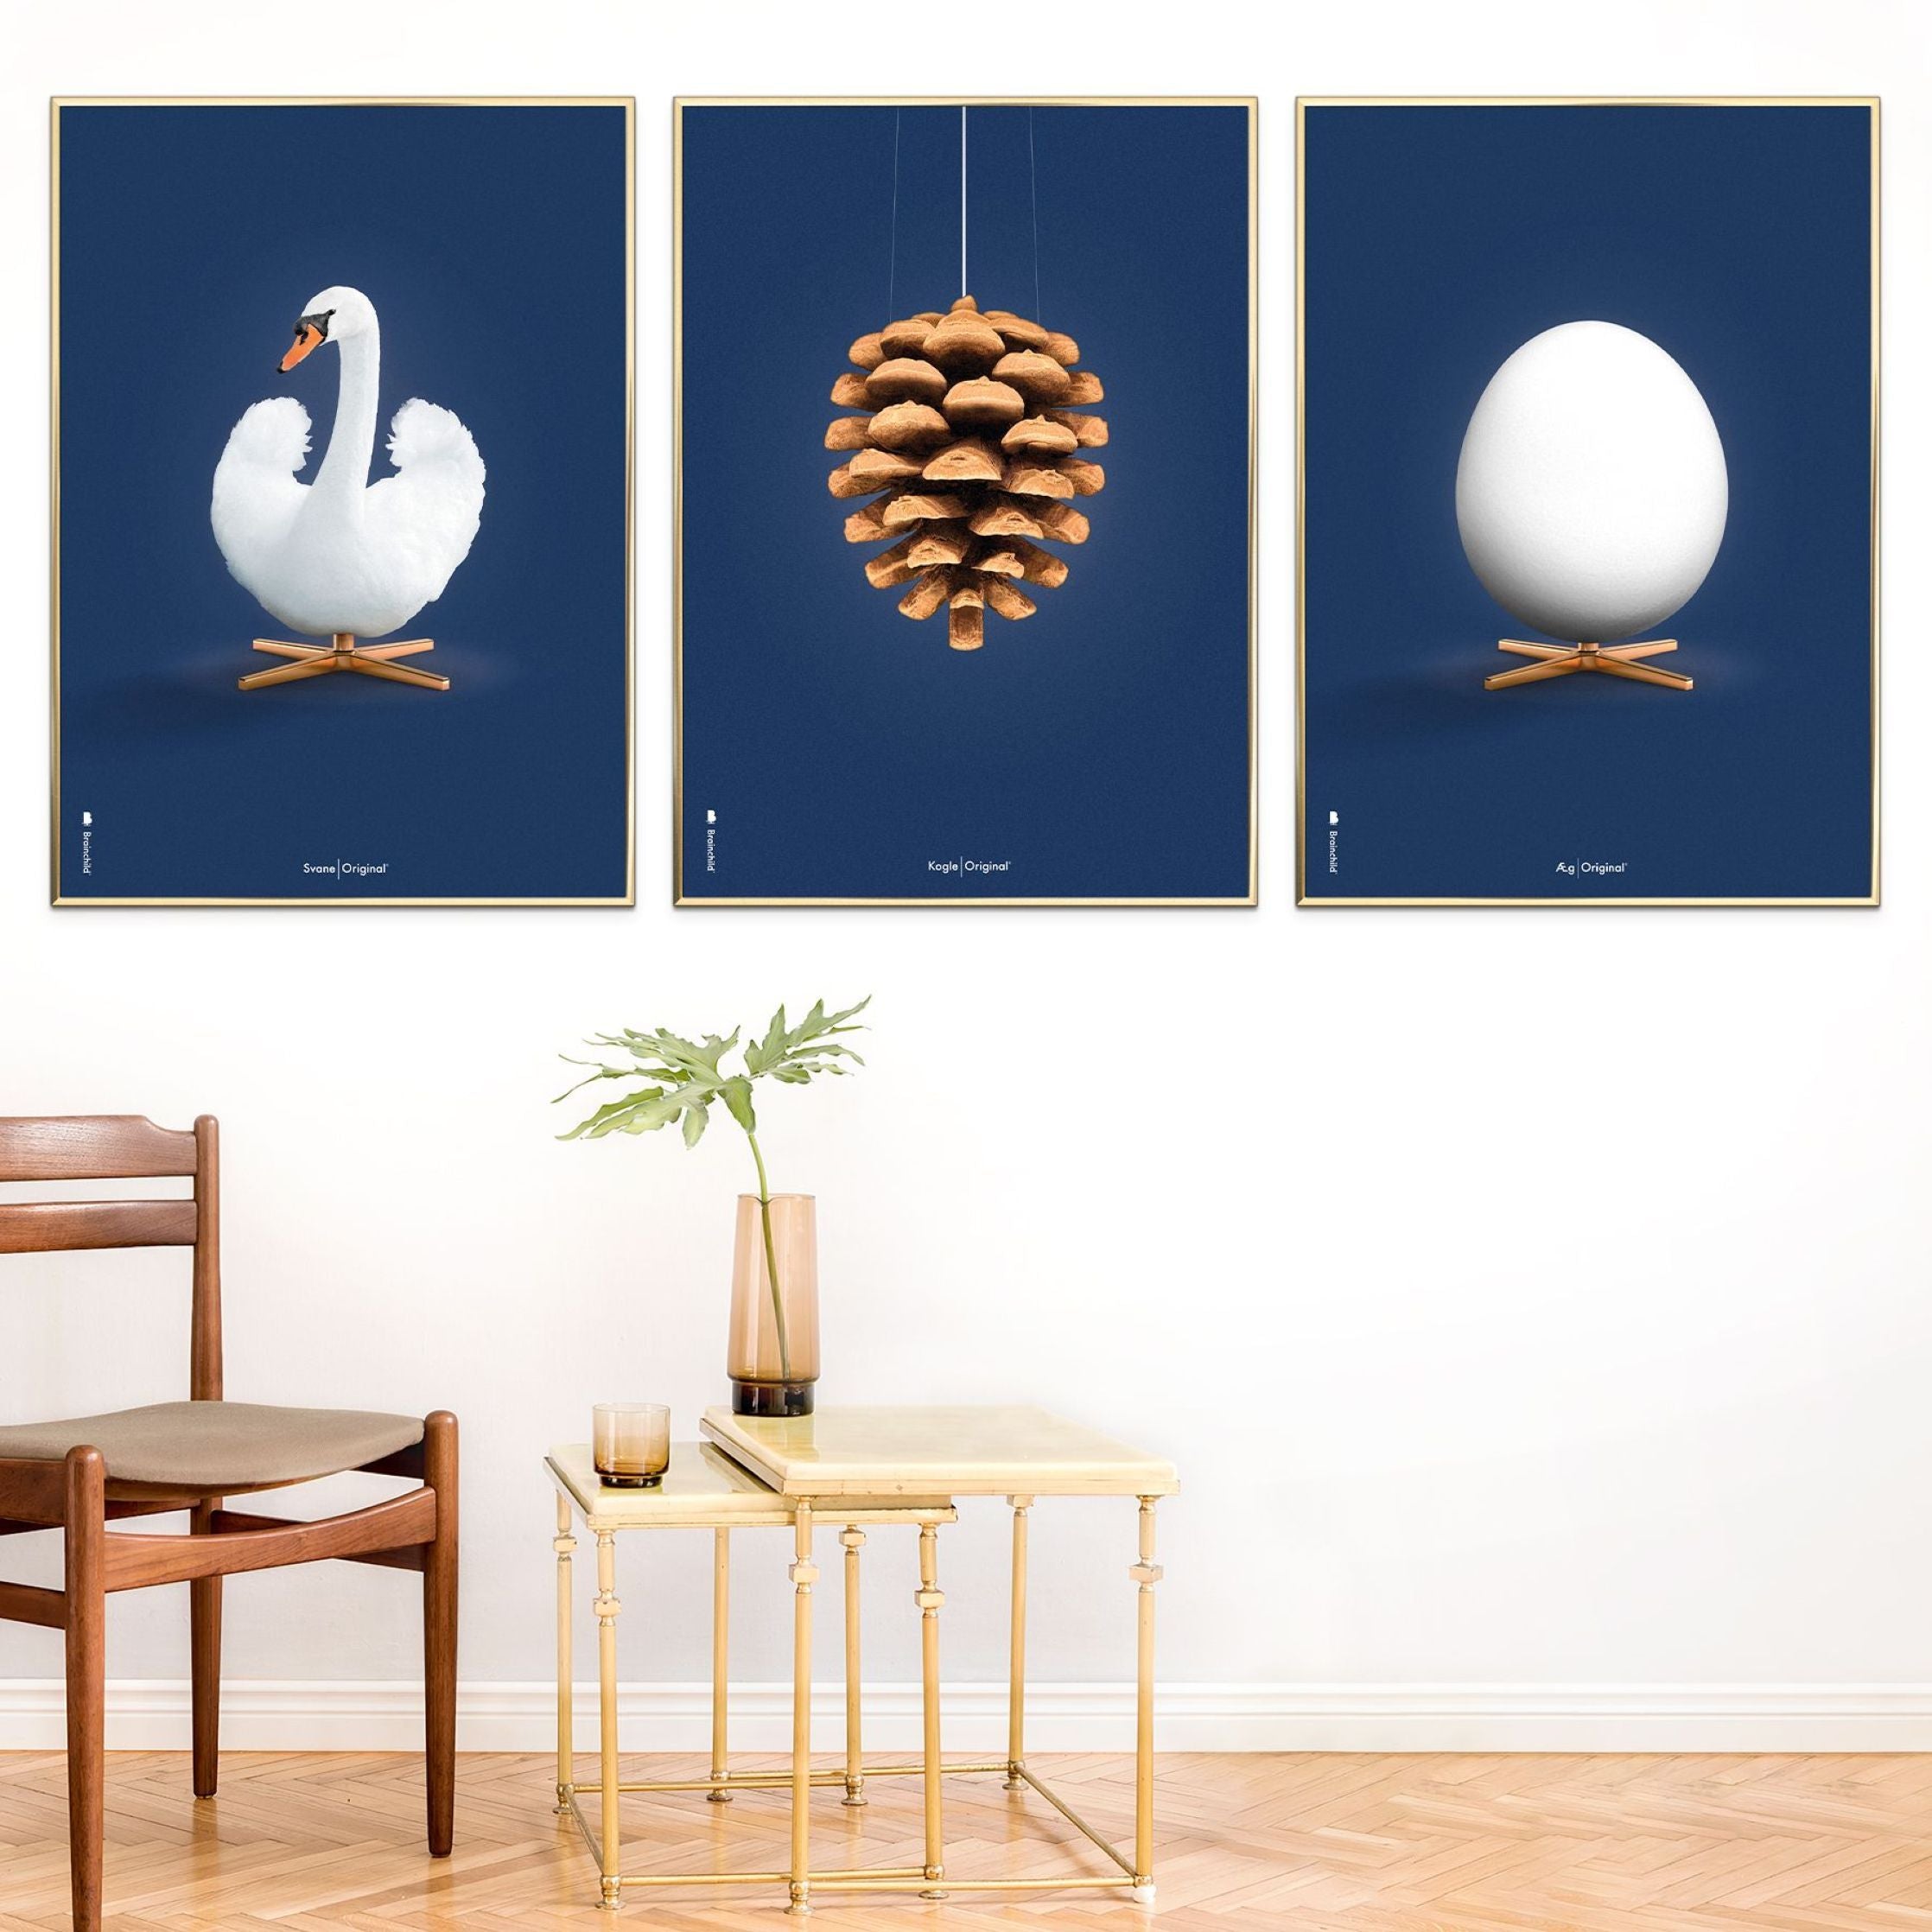 Brainchild Pine Cone Classic Poster, Frame Made Of Light Wood A5, Dark Blue Background